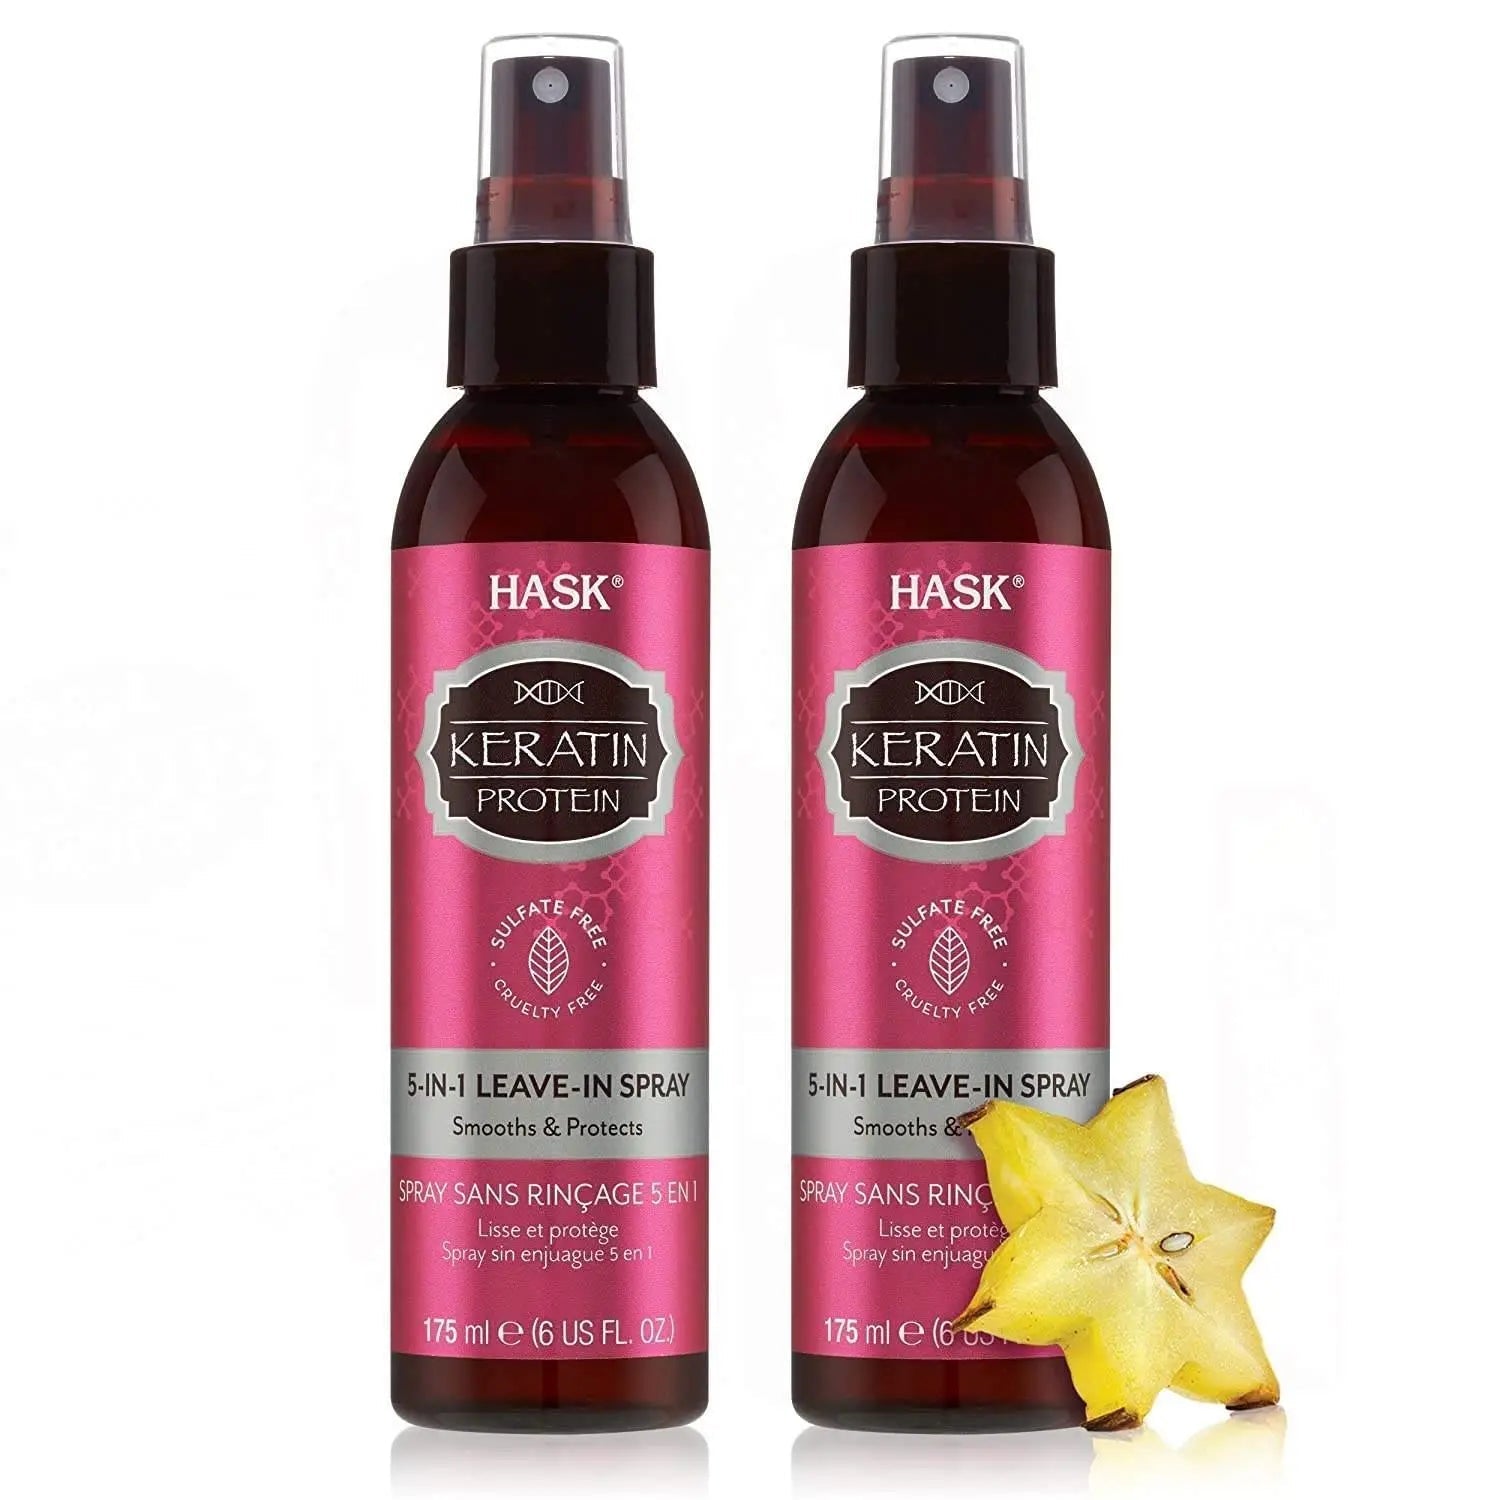 Wholesale prices with free shipping all over United States HASK Keratin Protein 5-in-1 Leave-In (6 oz., 2 pk.) - Steven Deals